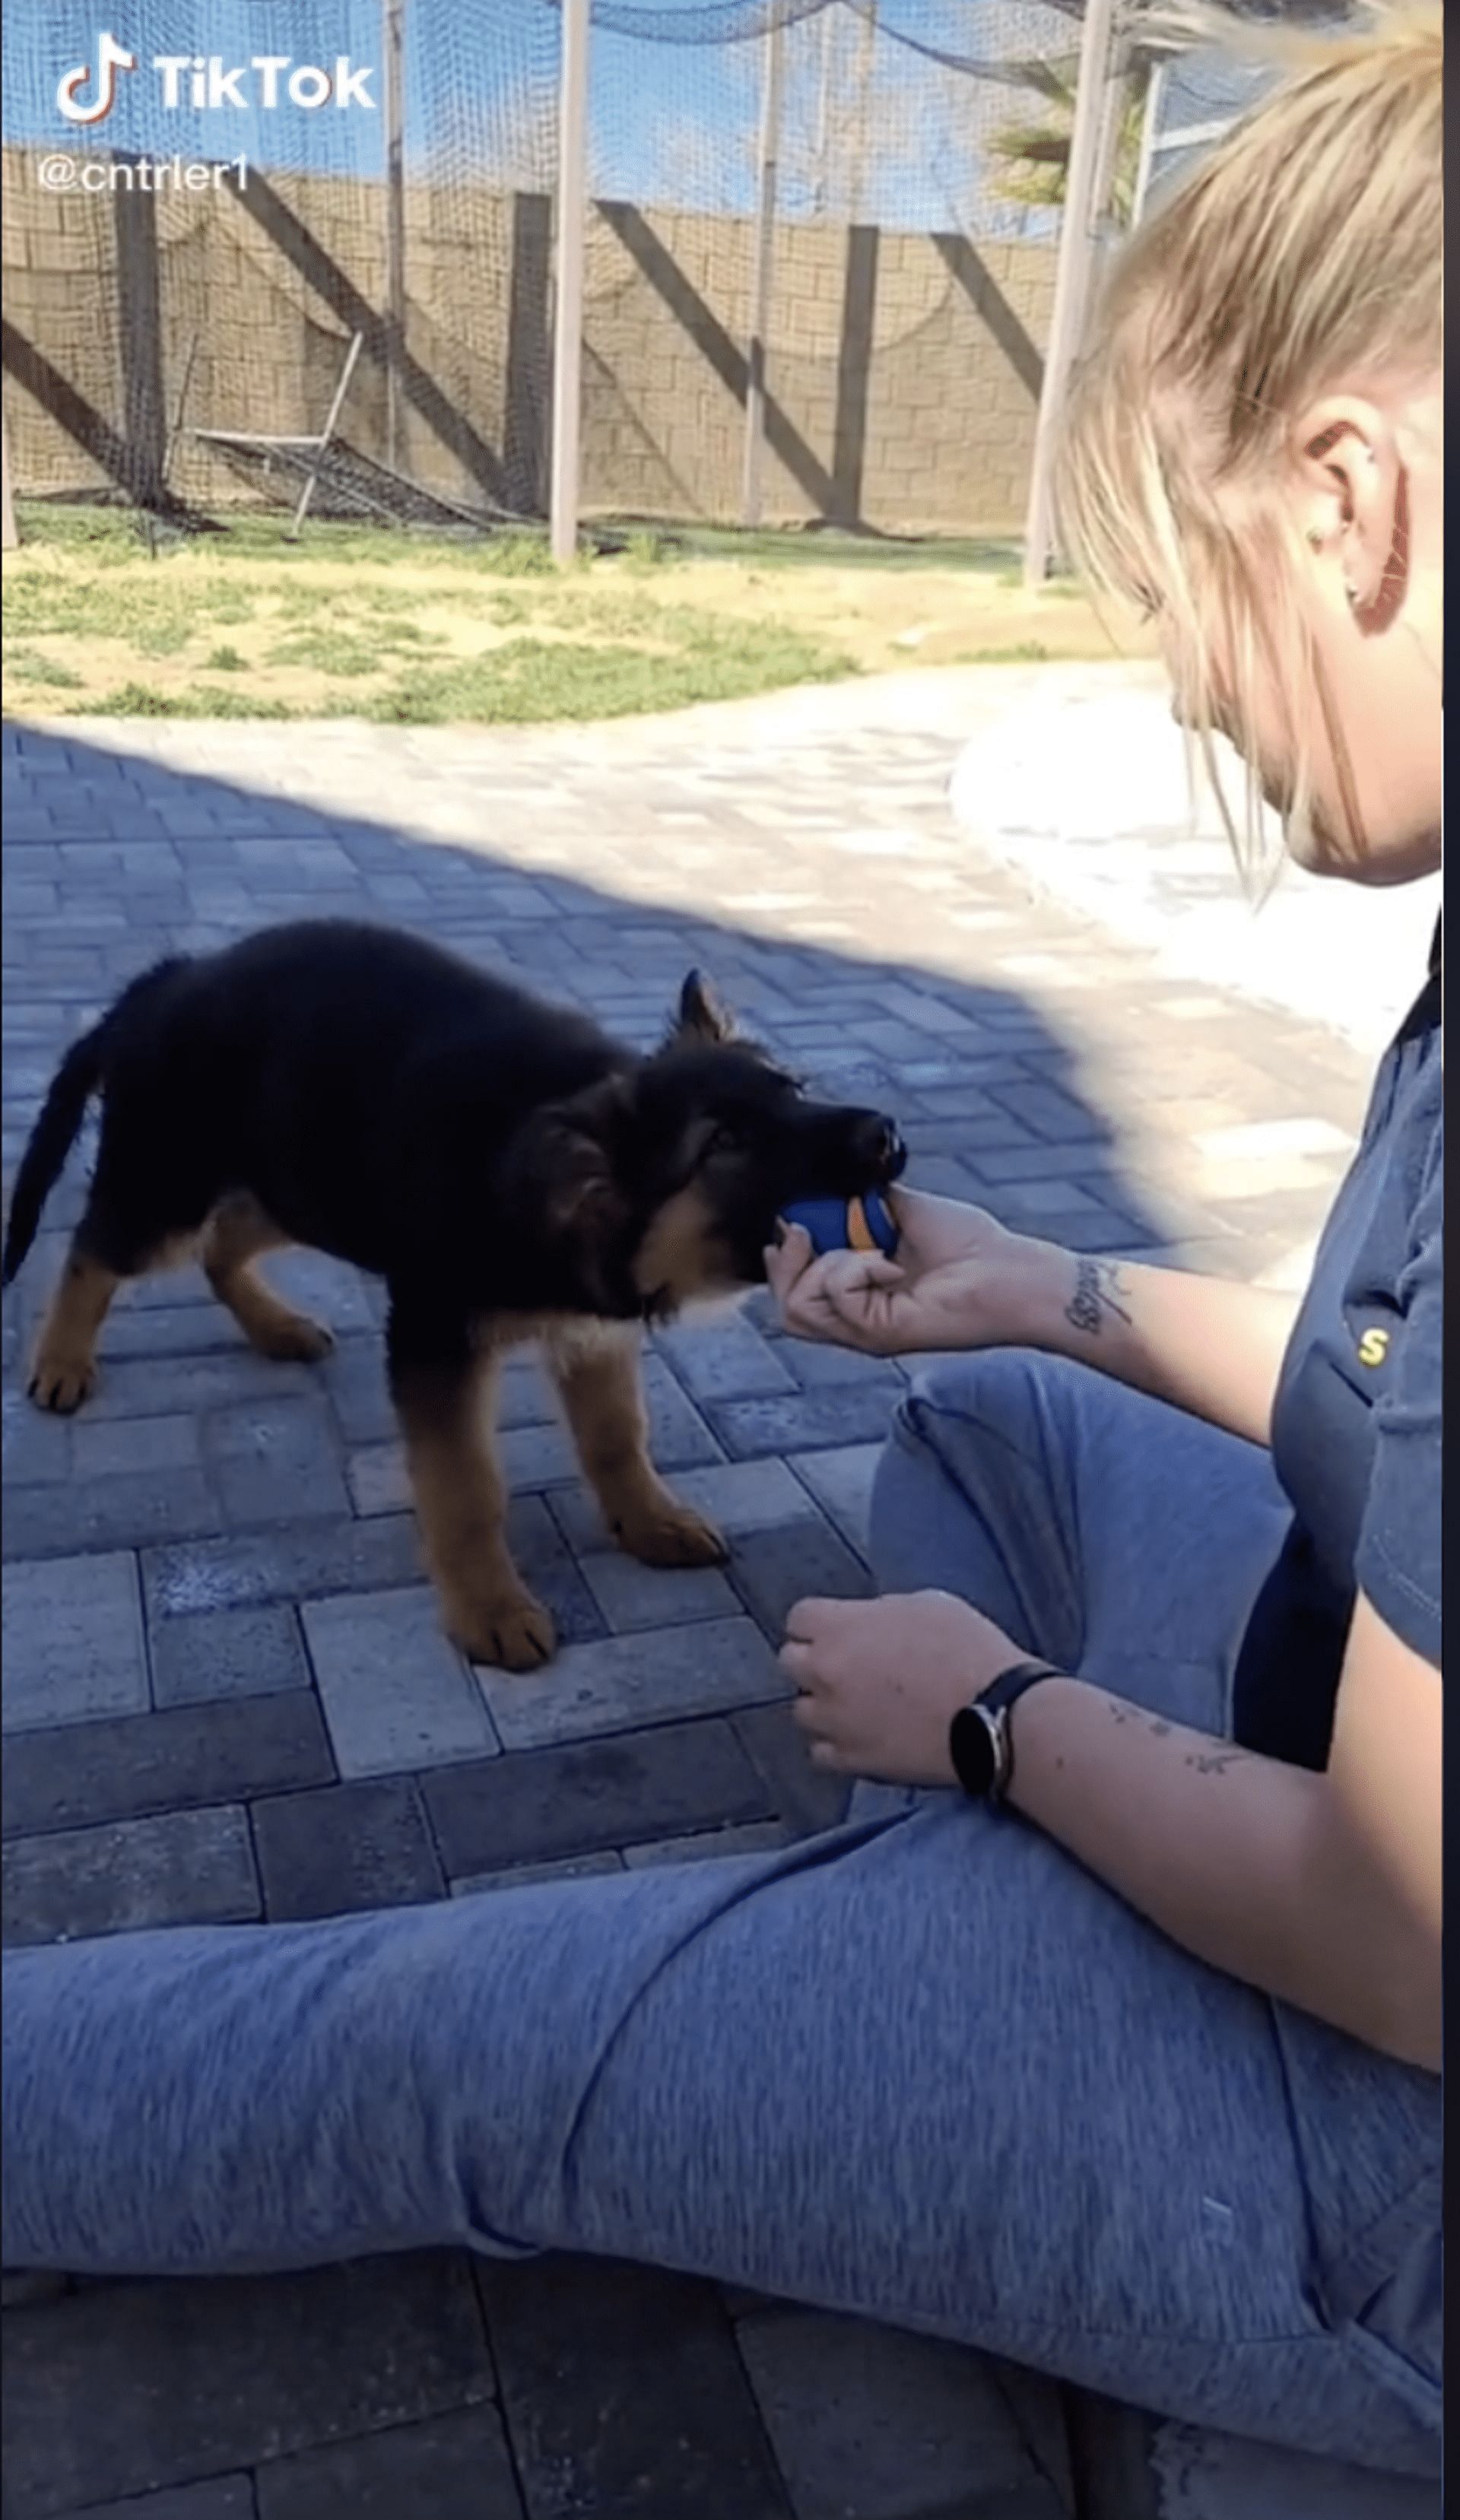 A TikToker participated in the Bop It Twist It Pull It challenge with her pet (Image via TikTok)